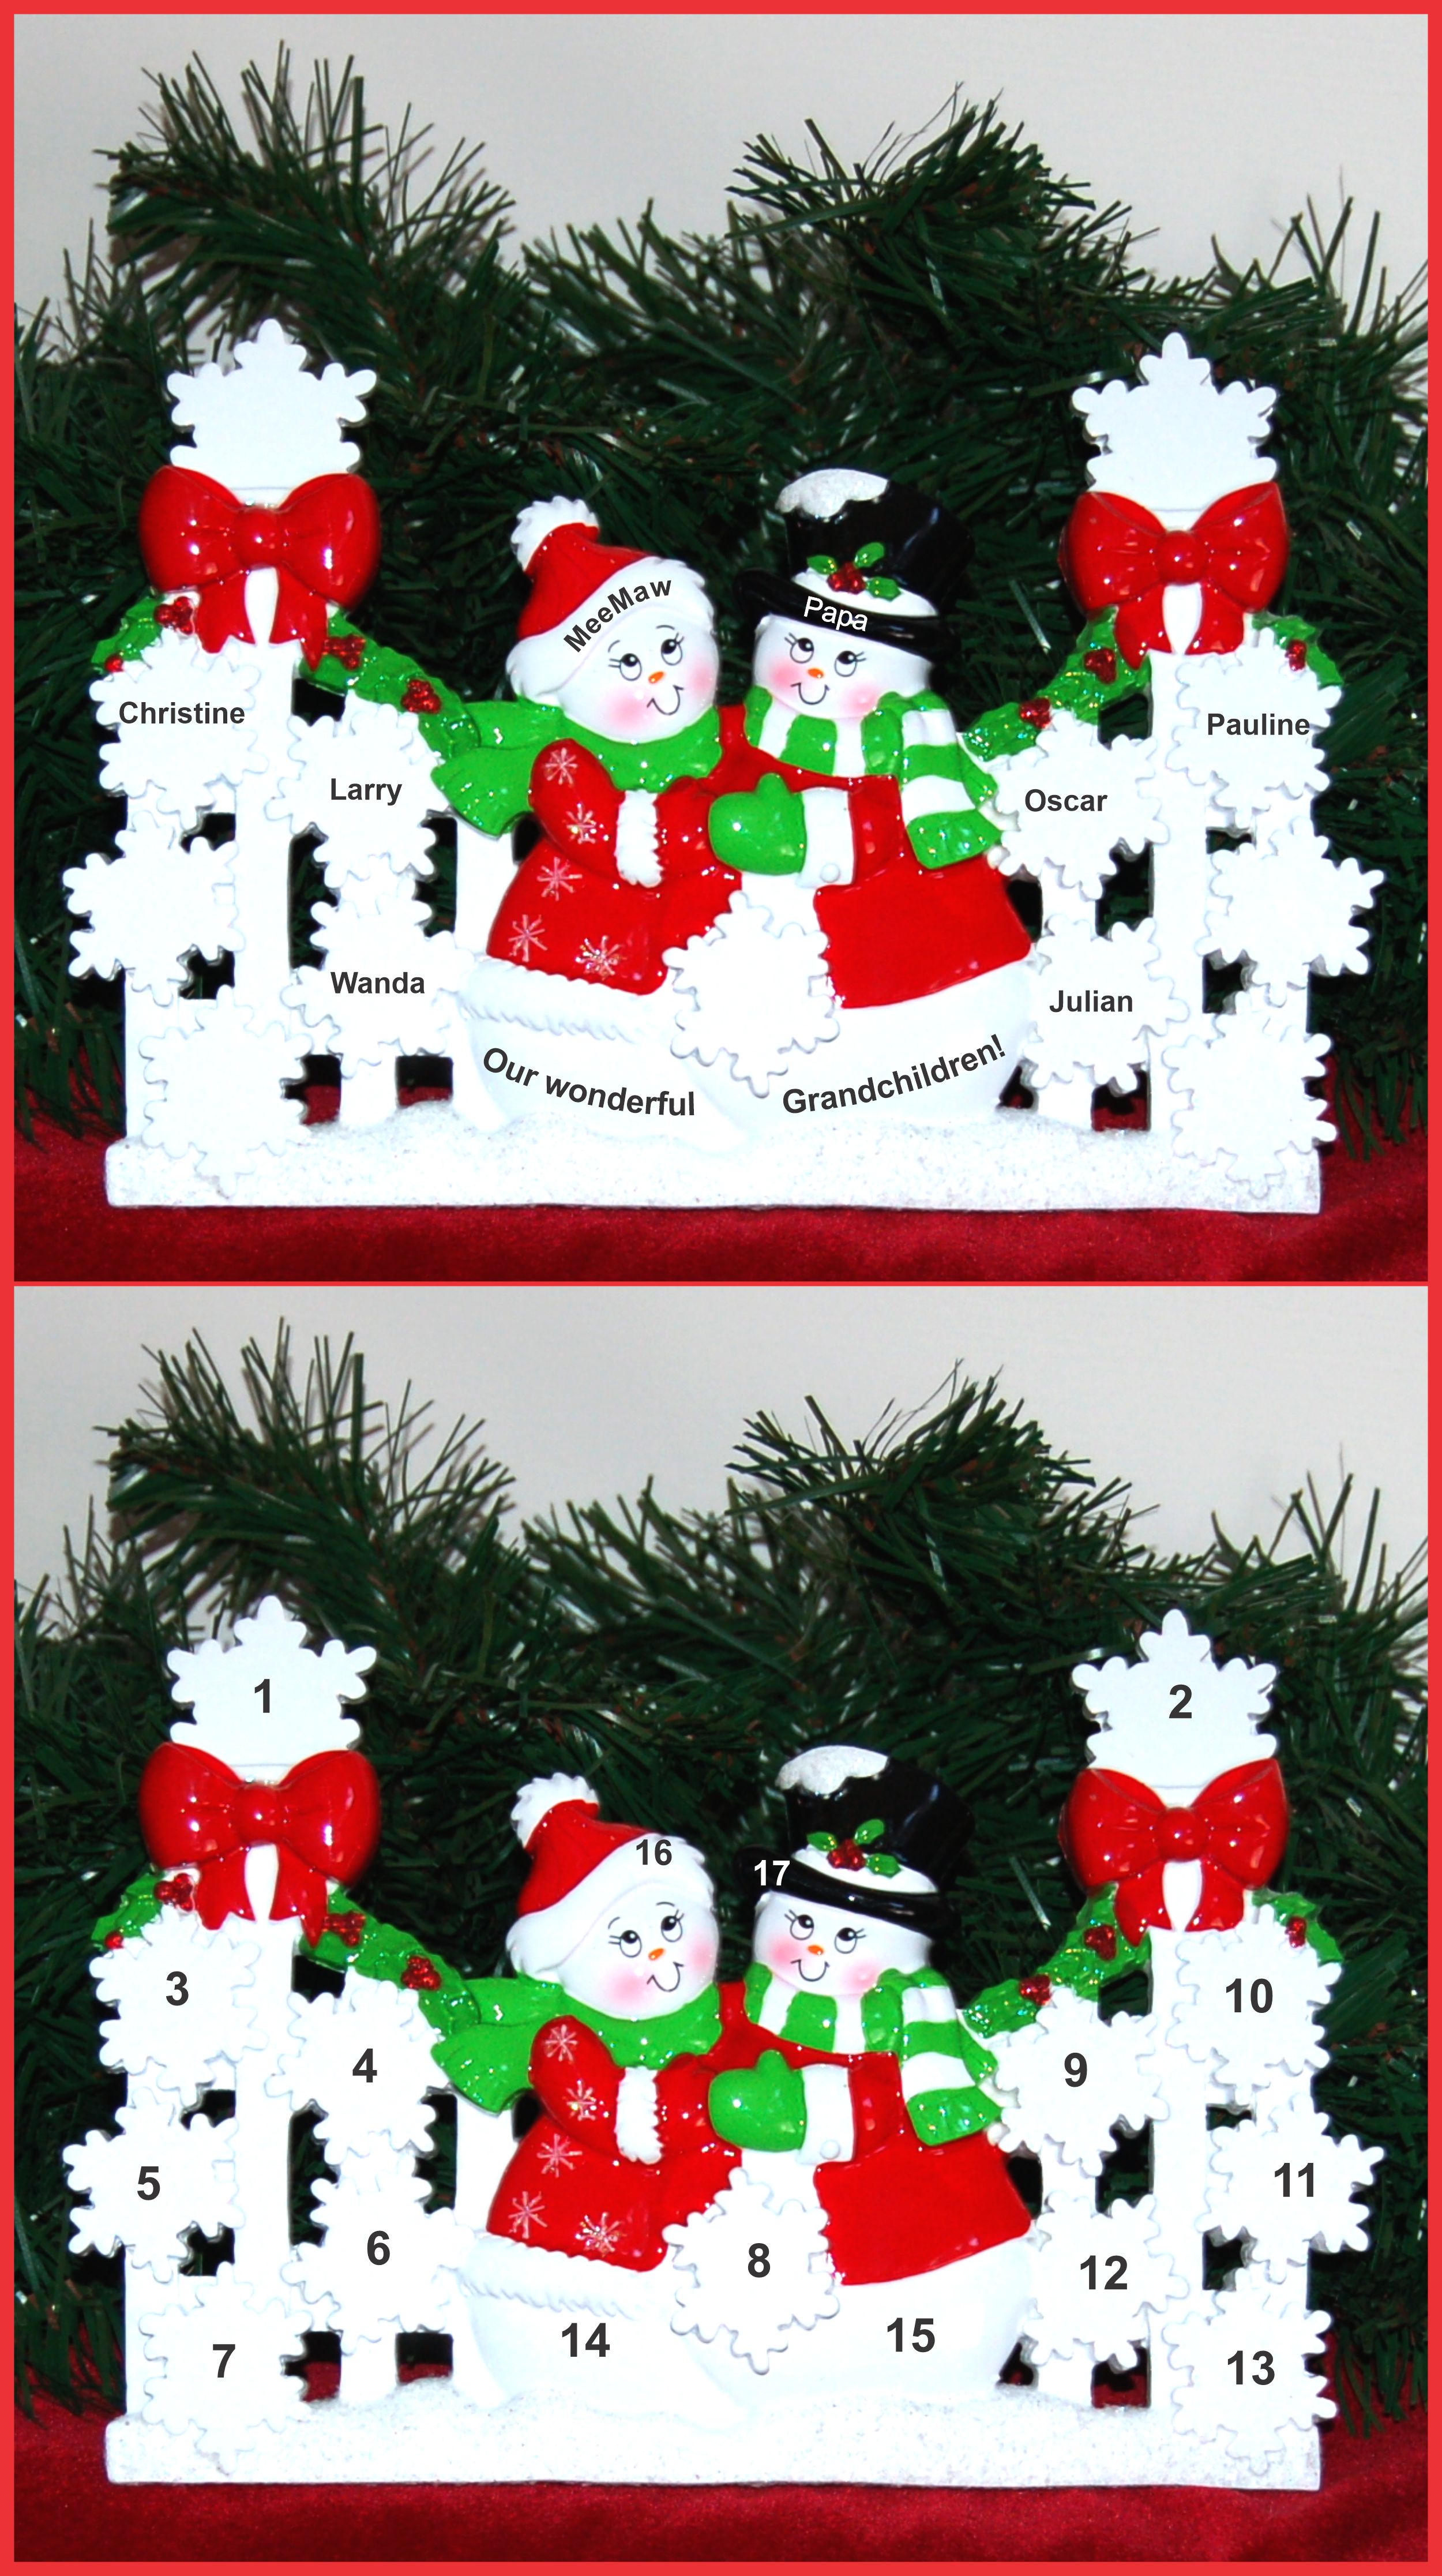 Tabletop Christmas Decoration Snowflakes for 6 Grandchildren Personalized by RussellRhodes.com